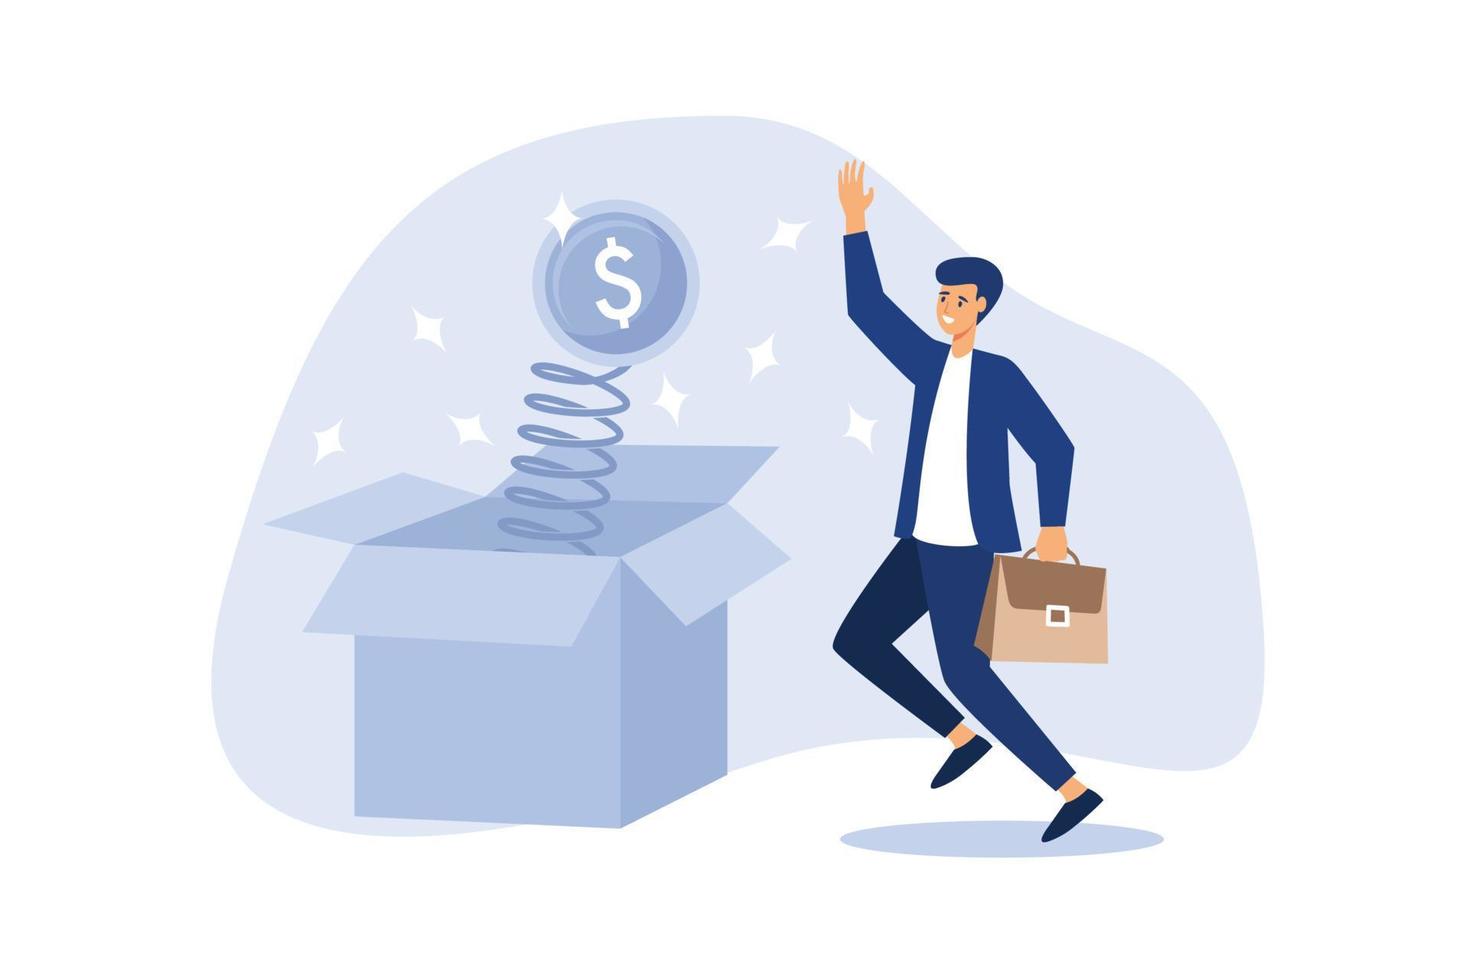 Surprise money or reward, bonus or salary raise, investment profit, dividend or high return stock, lucky giveaway or winning prize concept, happy businessman jumping high opening surprise money box. vector